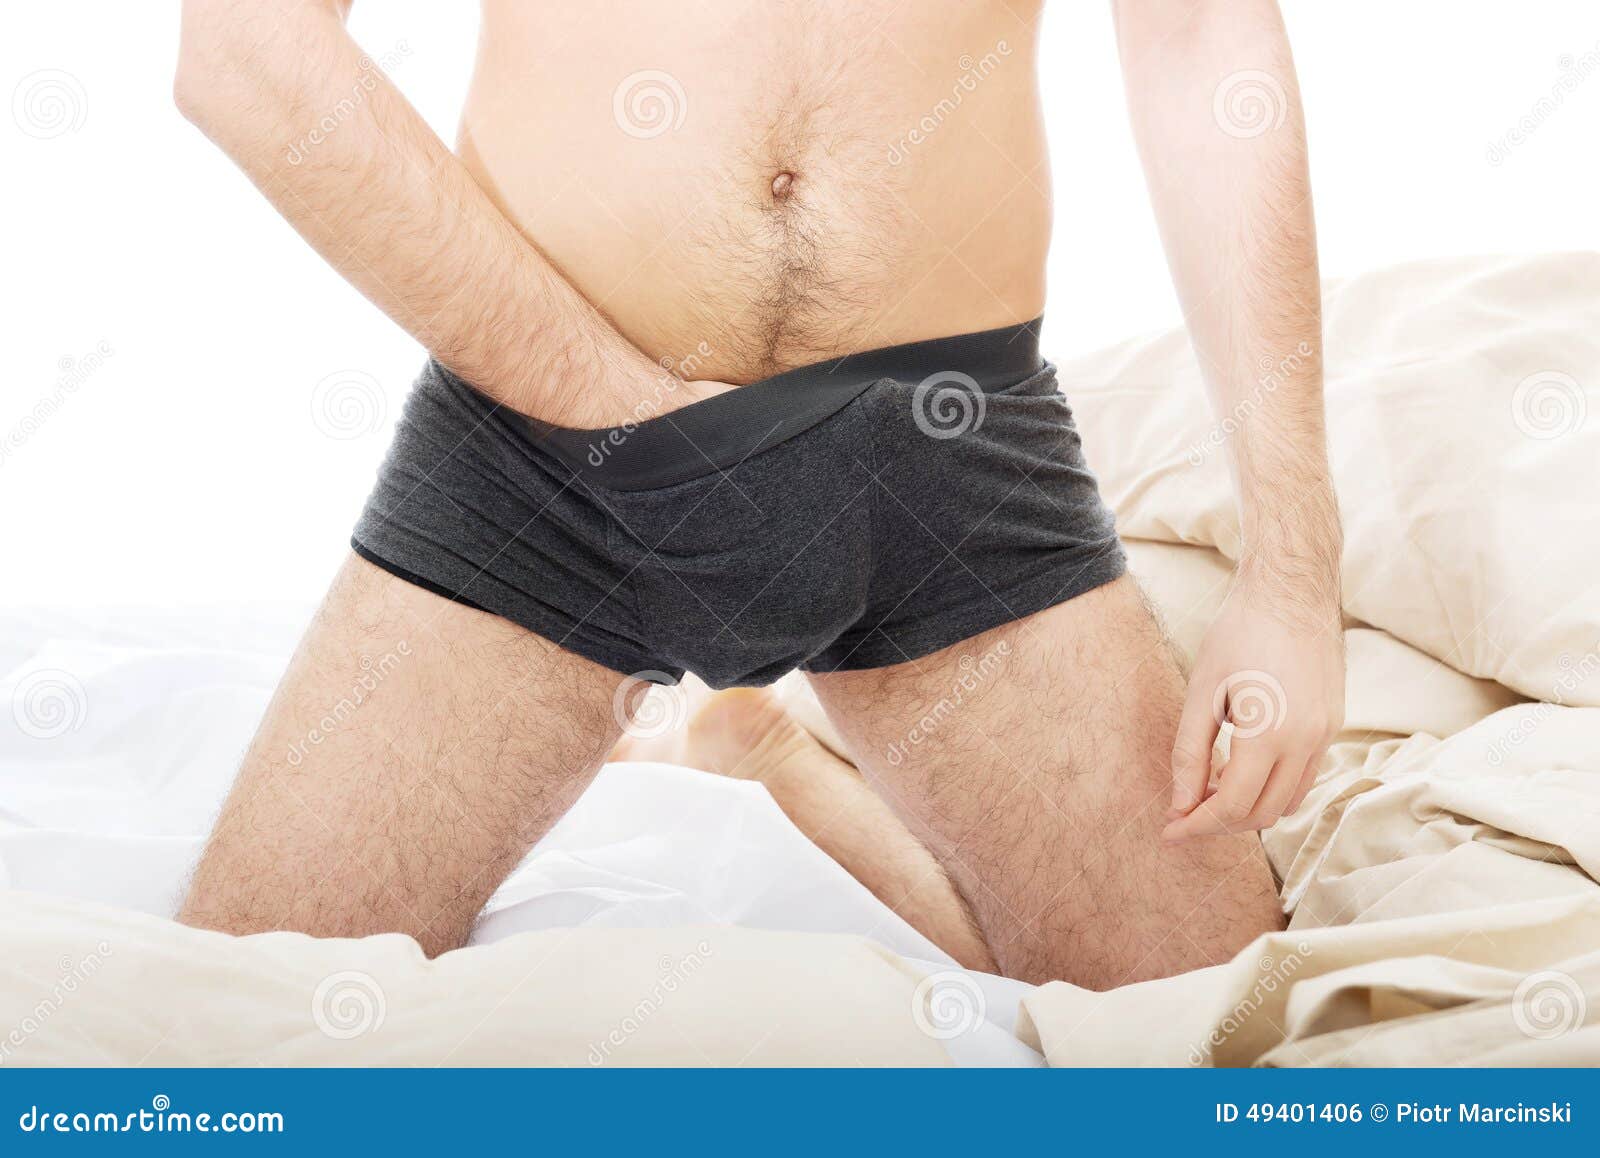 Playful Male Hand in Panties. Stock Photo - Image of hand, bare